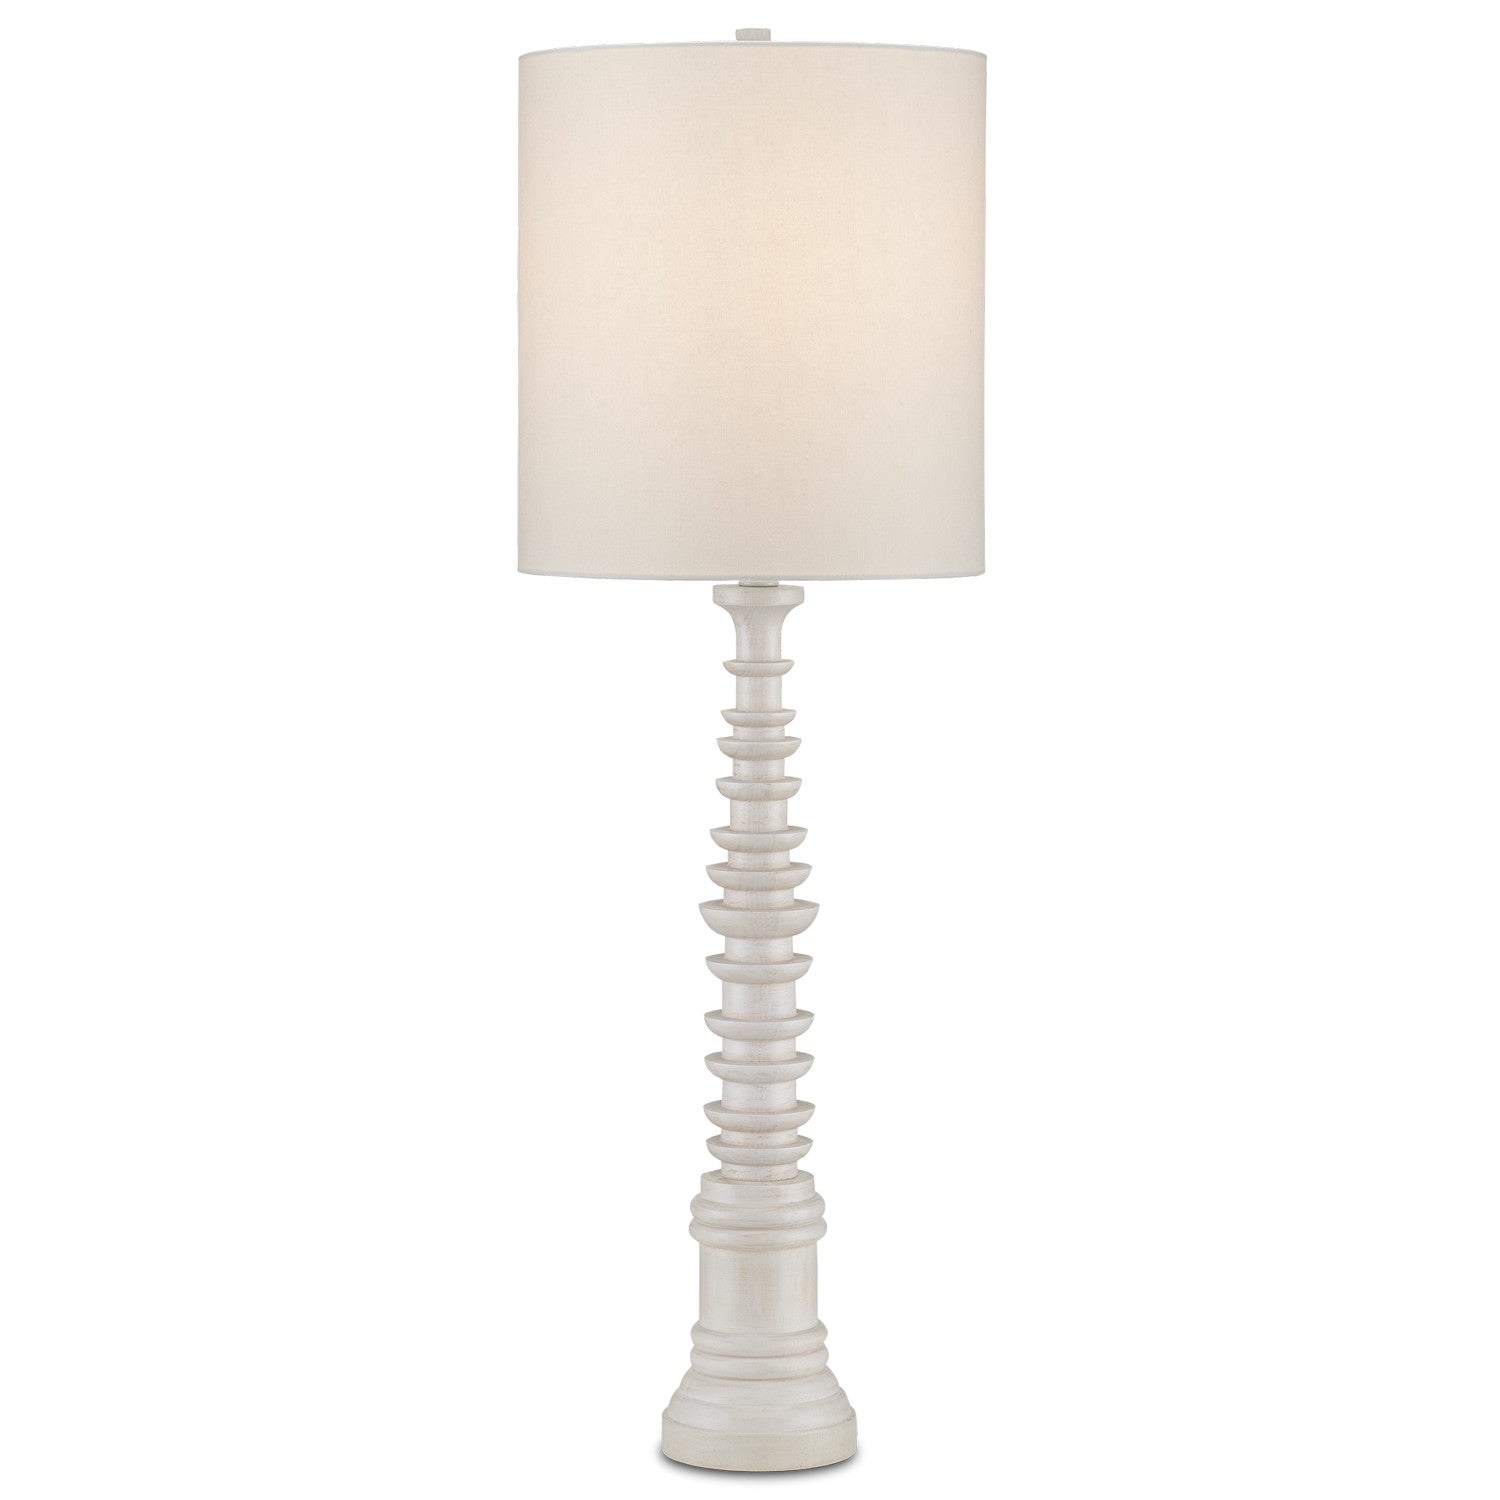 Currey and Company - 6000-0896 - One Light Table Lamp - Phyllis Morris - Whitewash